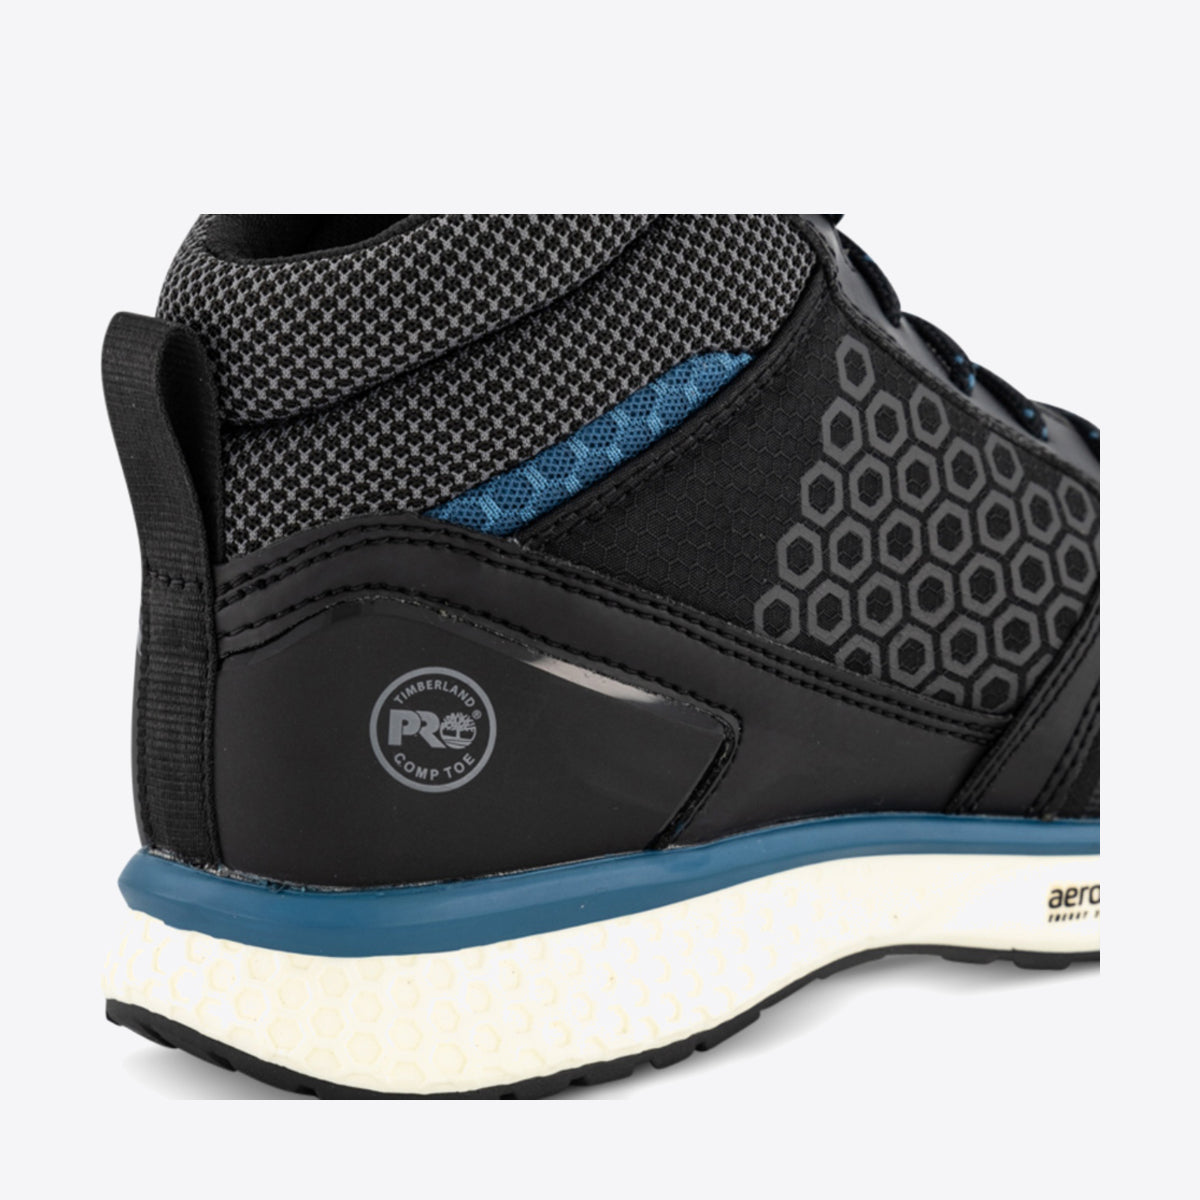 TIMBERLAND PRO Reaxion Mid Black/Blue - Image 6